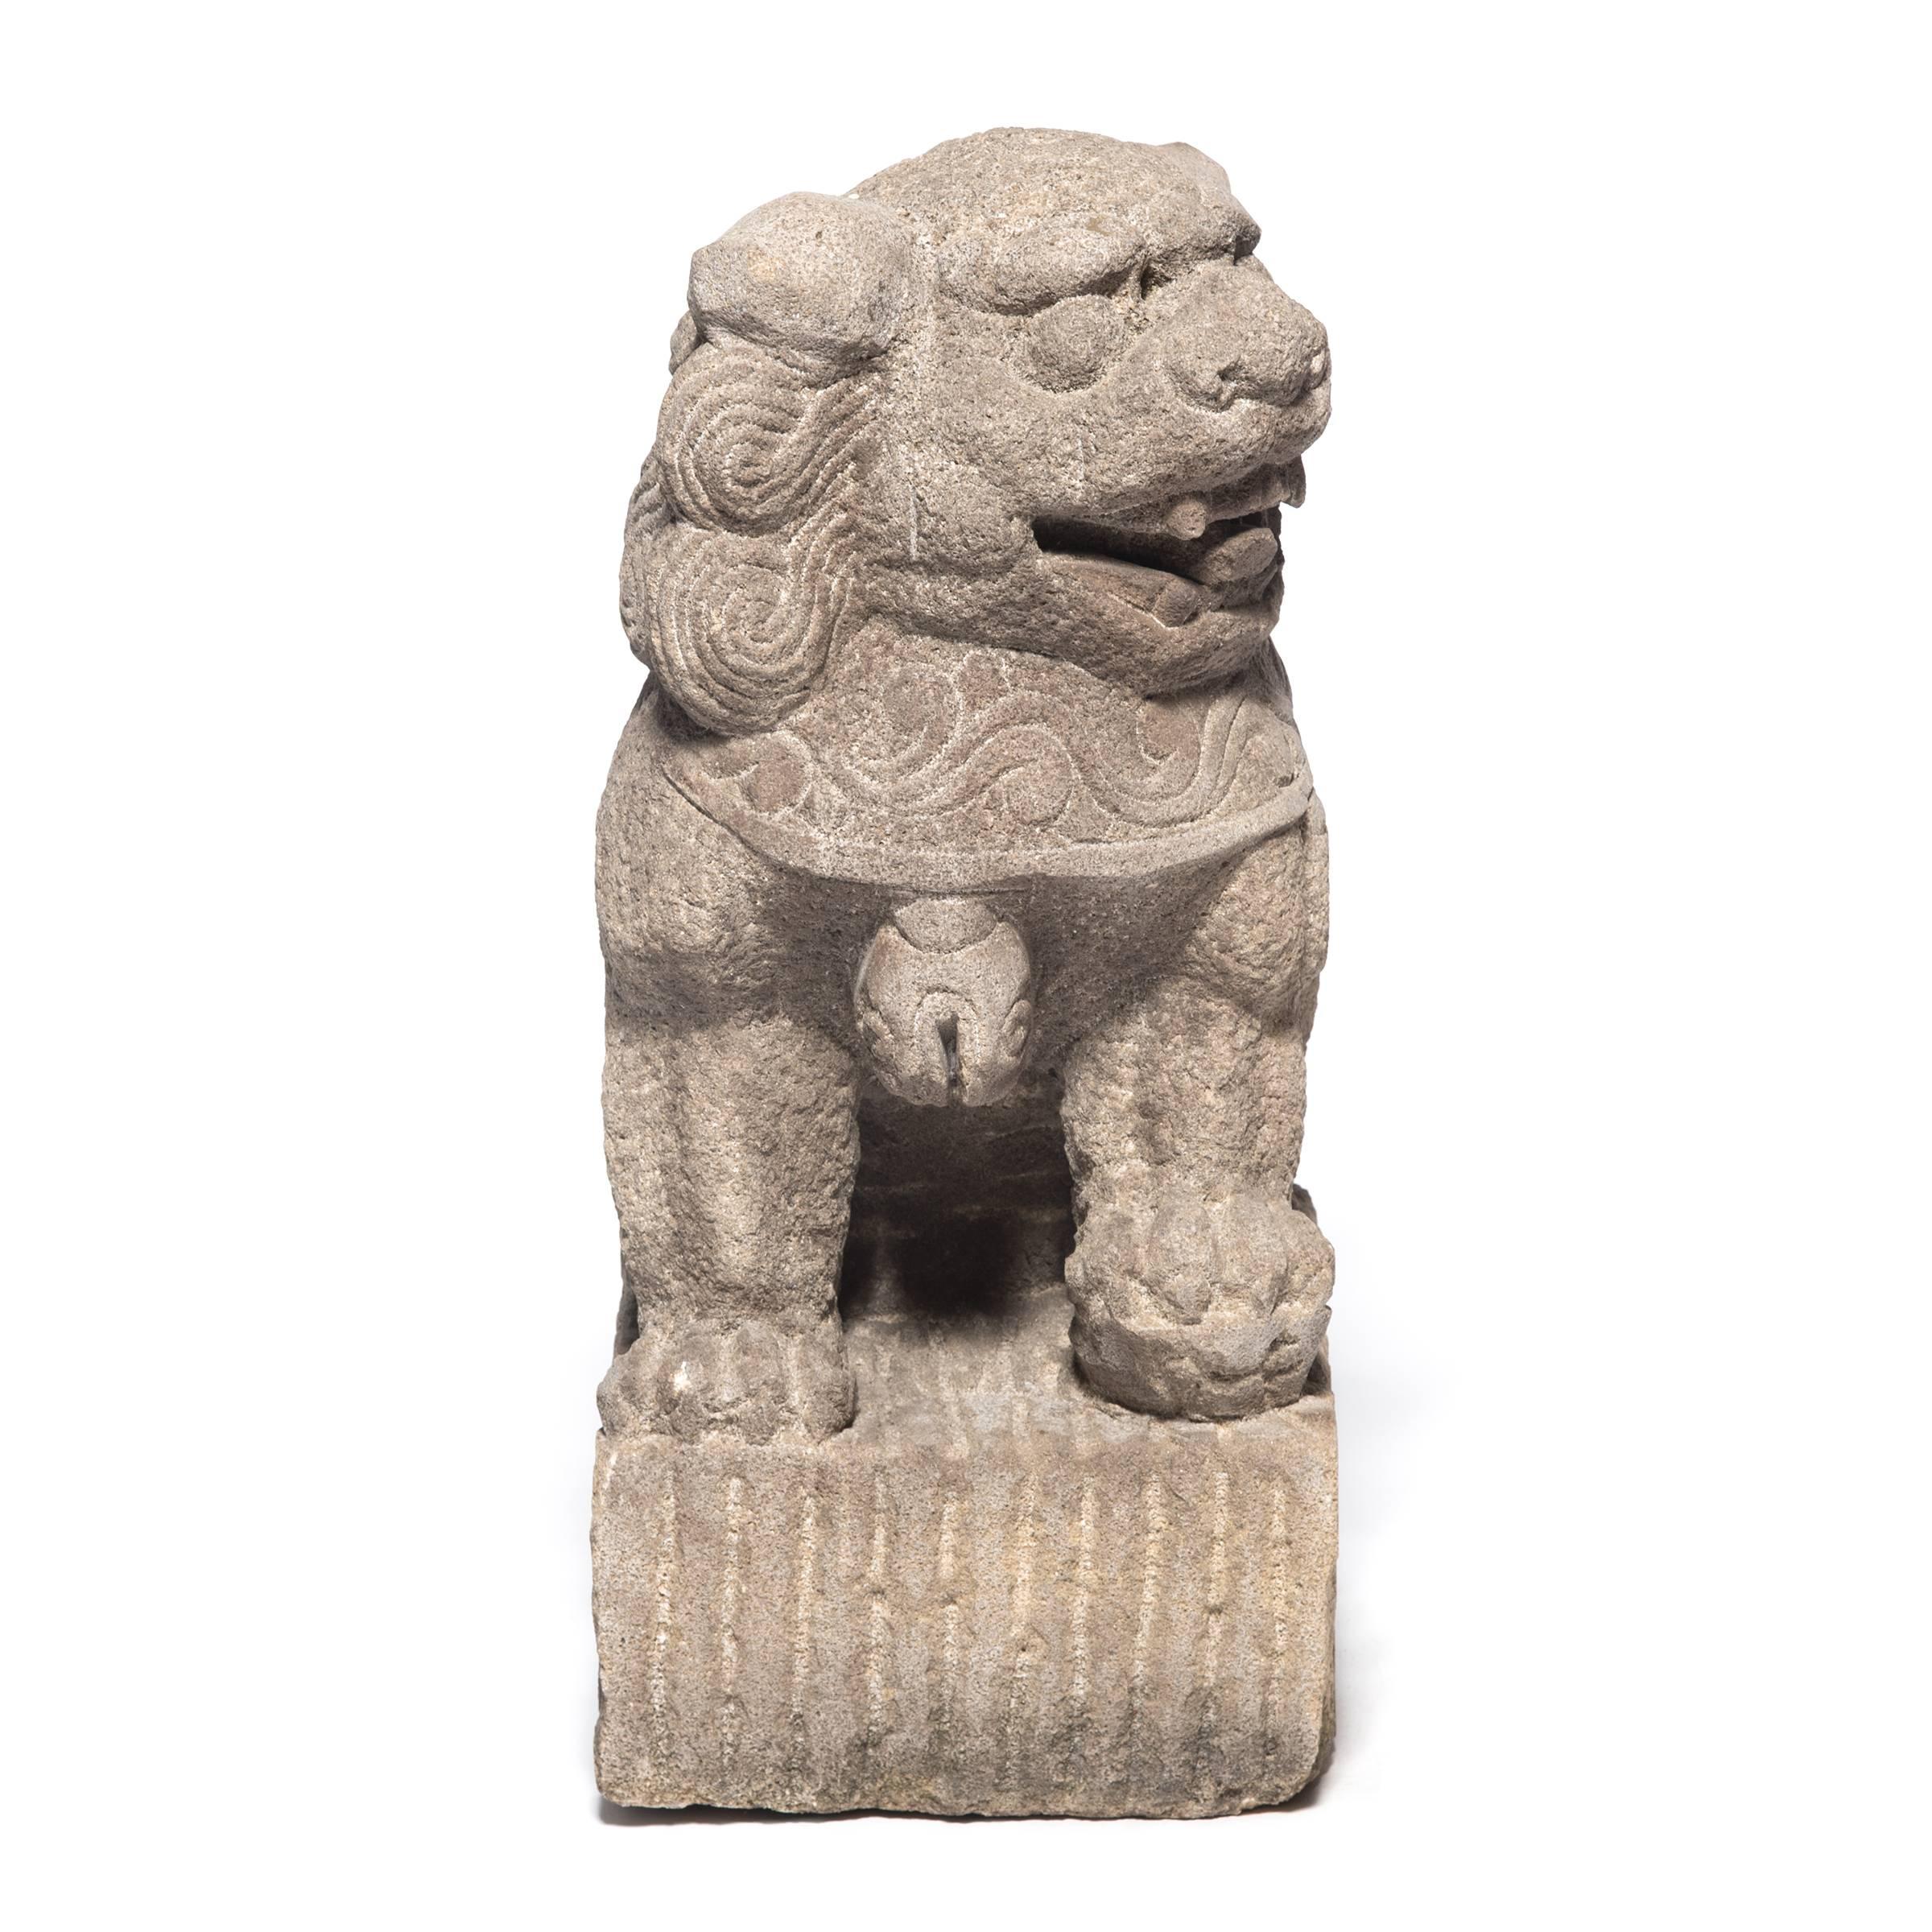 These 19th century Chinese Fu dog protectors, each carved by hand from a single block of limestone, once guarded the entrance to a grand provincial Chinese home. Bells hanging from collars around their necks indicate that the pair has been